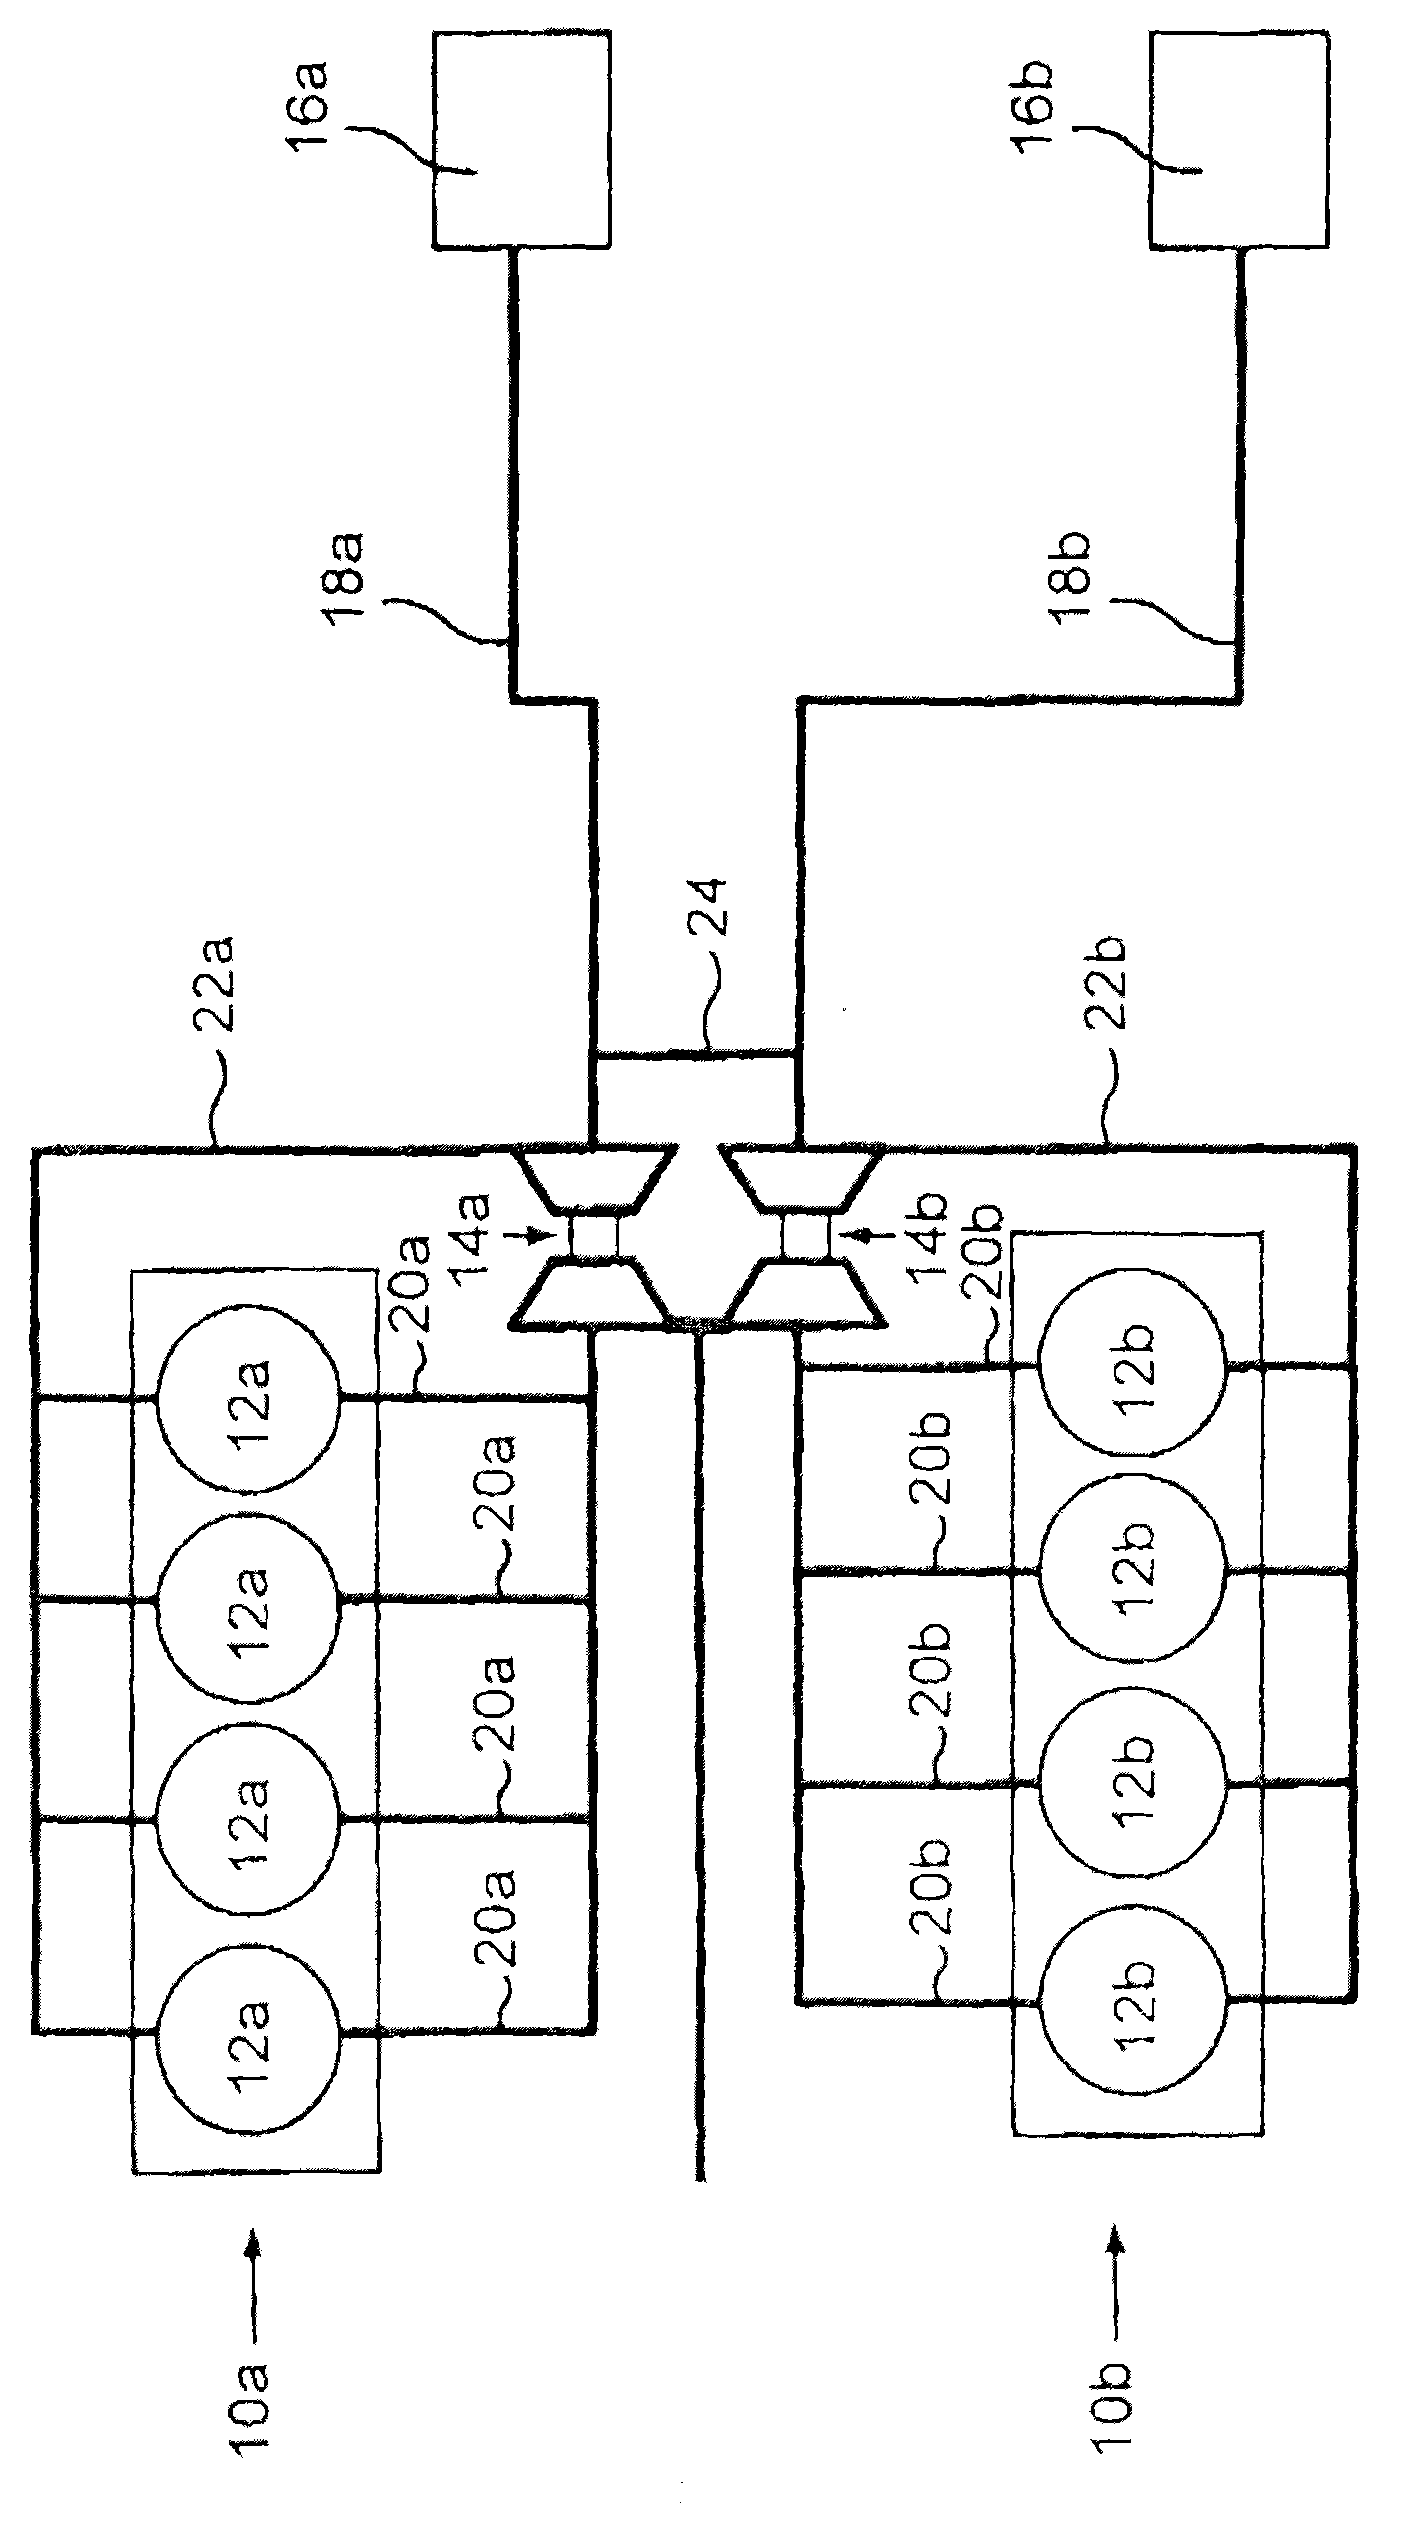 Structure having two independent turbochargers of combustion engines and operating method thereof